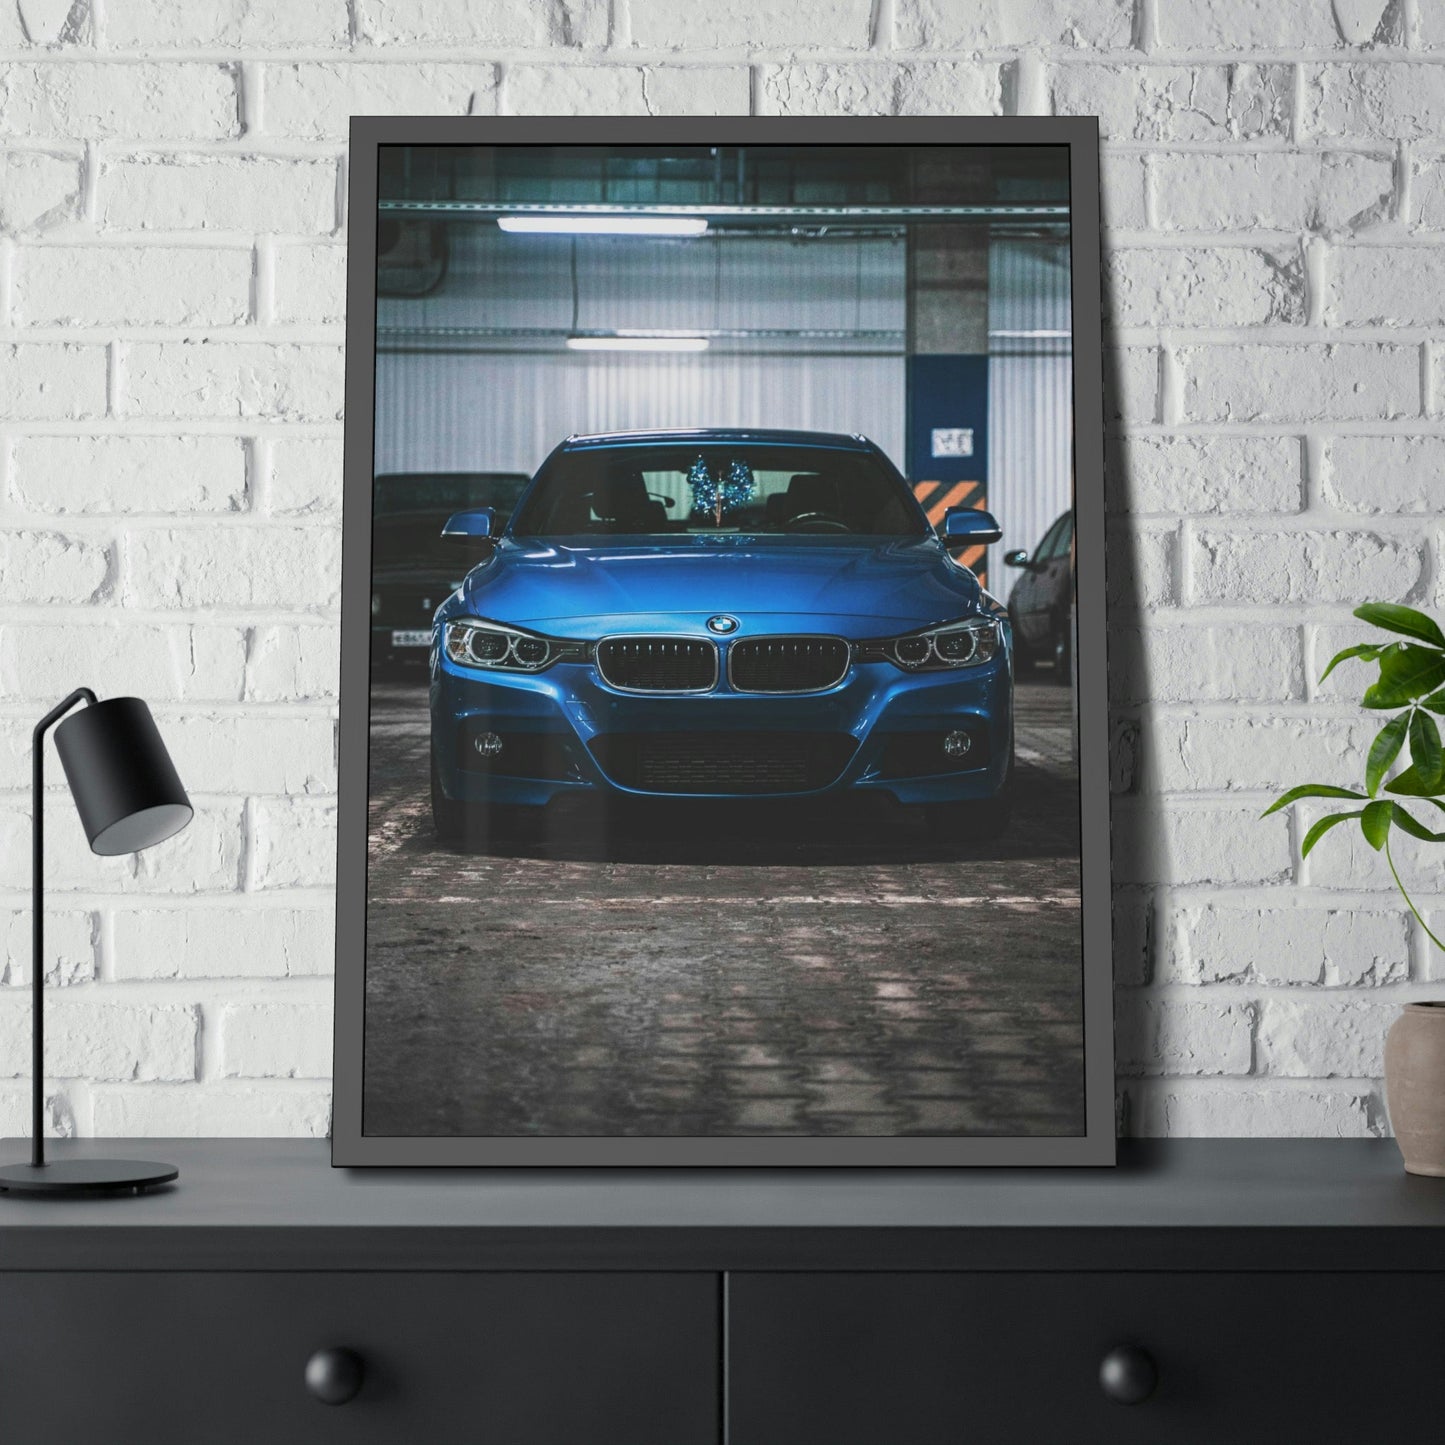 BMW's Signature Style: Modern Framed Canvas Print for Your Home